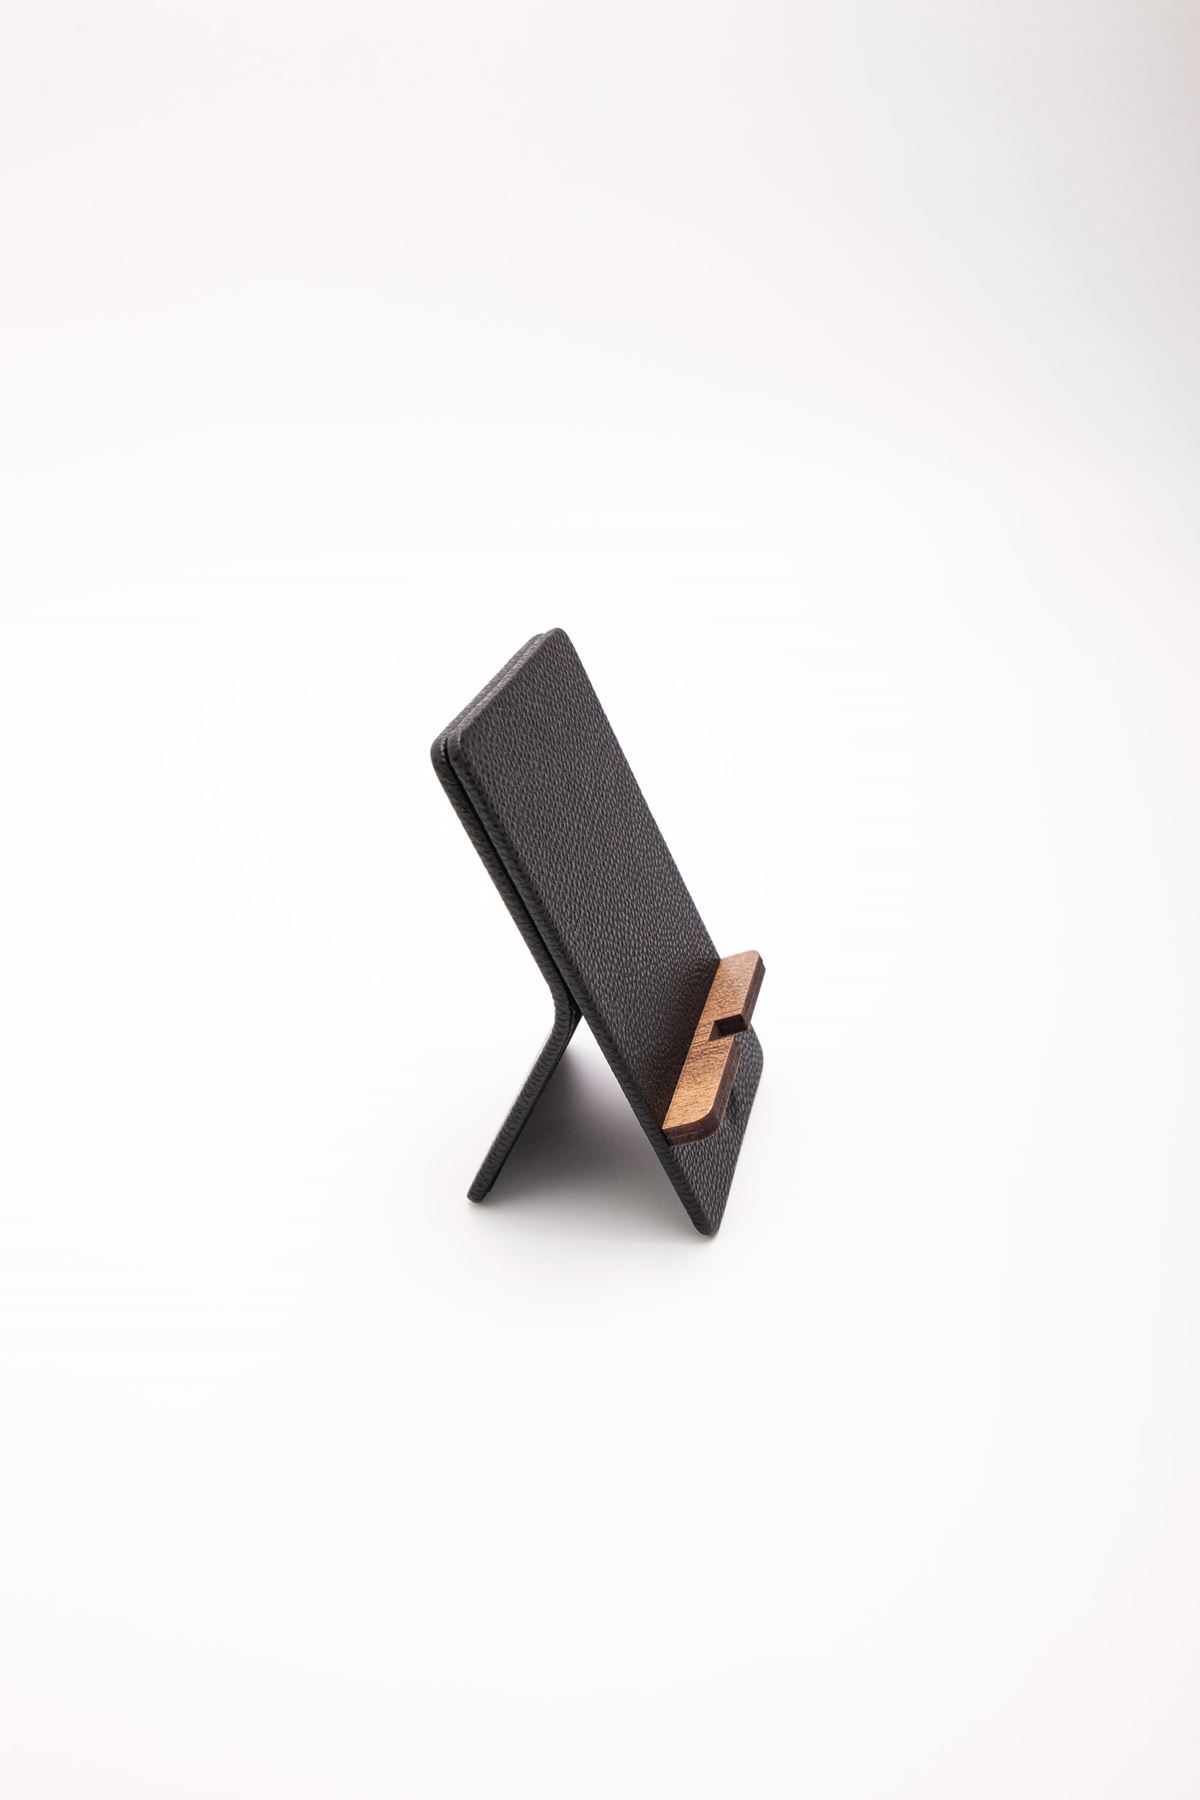 Leather Vertical Phone Holder